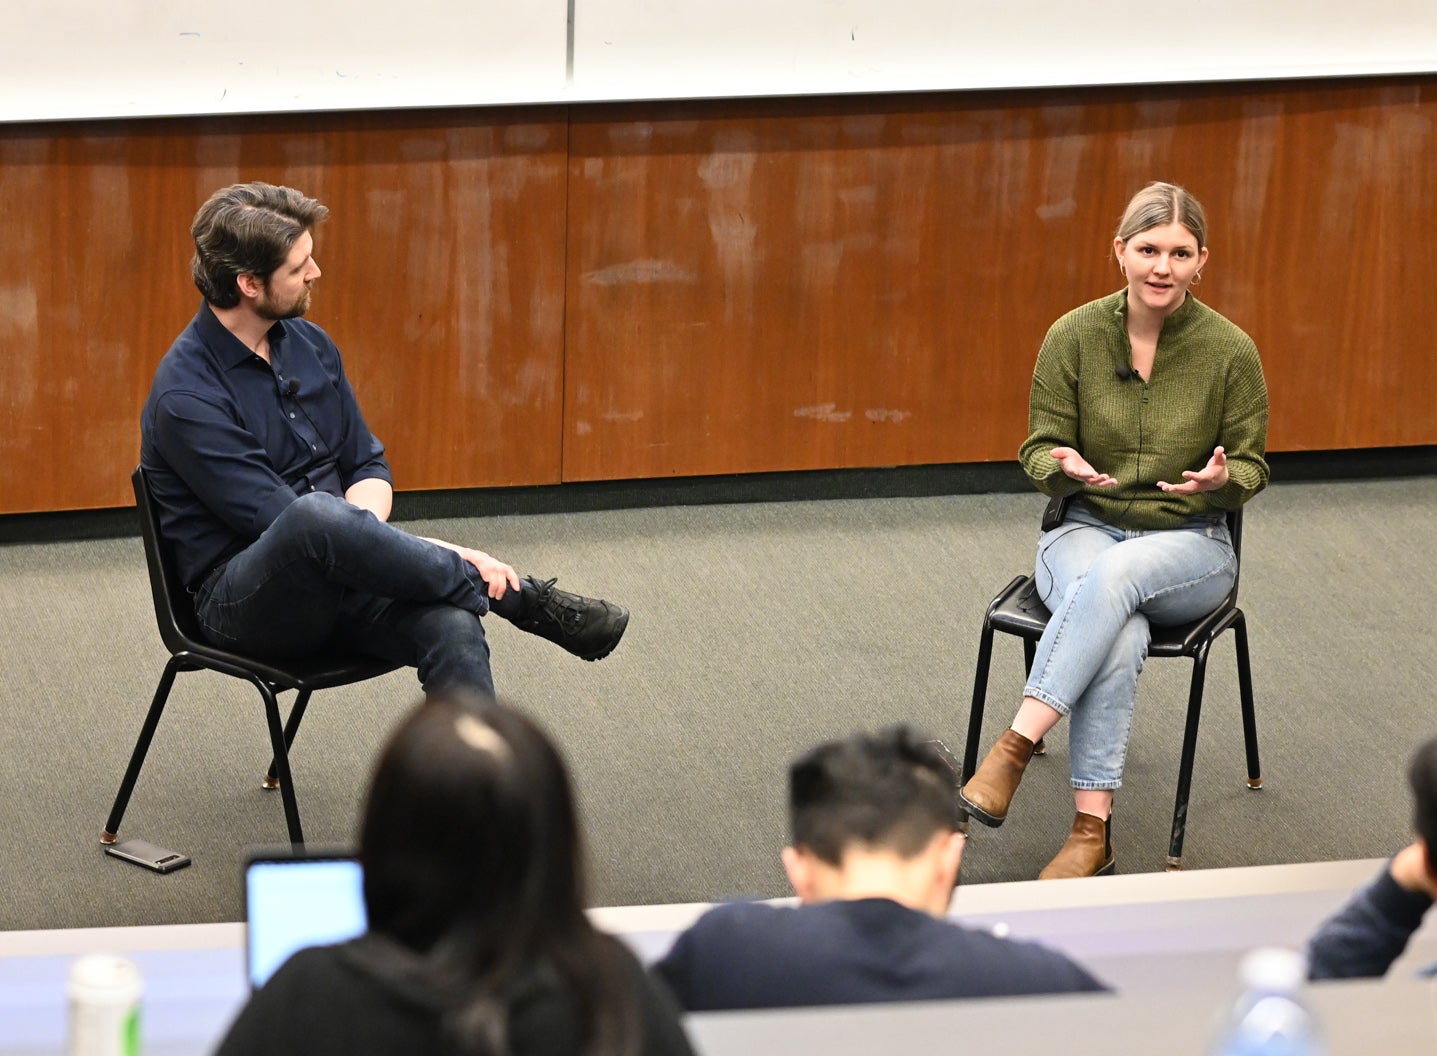 Eric Blondeel of Velocity and Kayli Dale co-founder of Friendlier sitting at front of classroom in conversation.